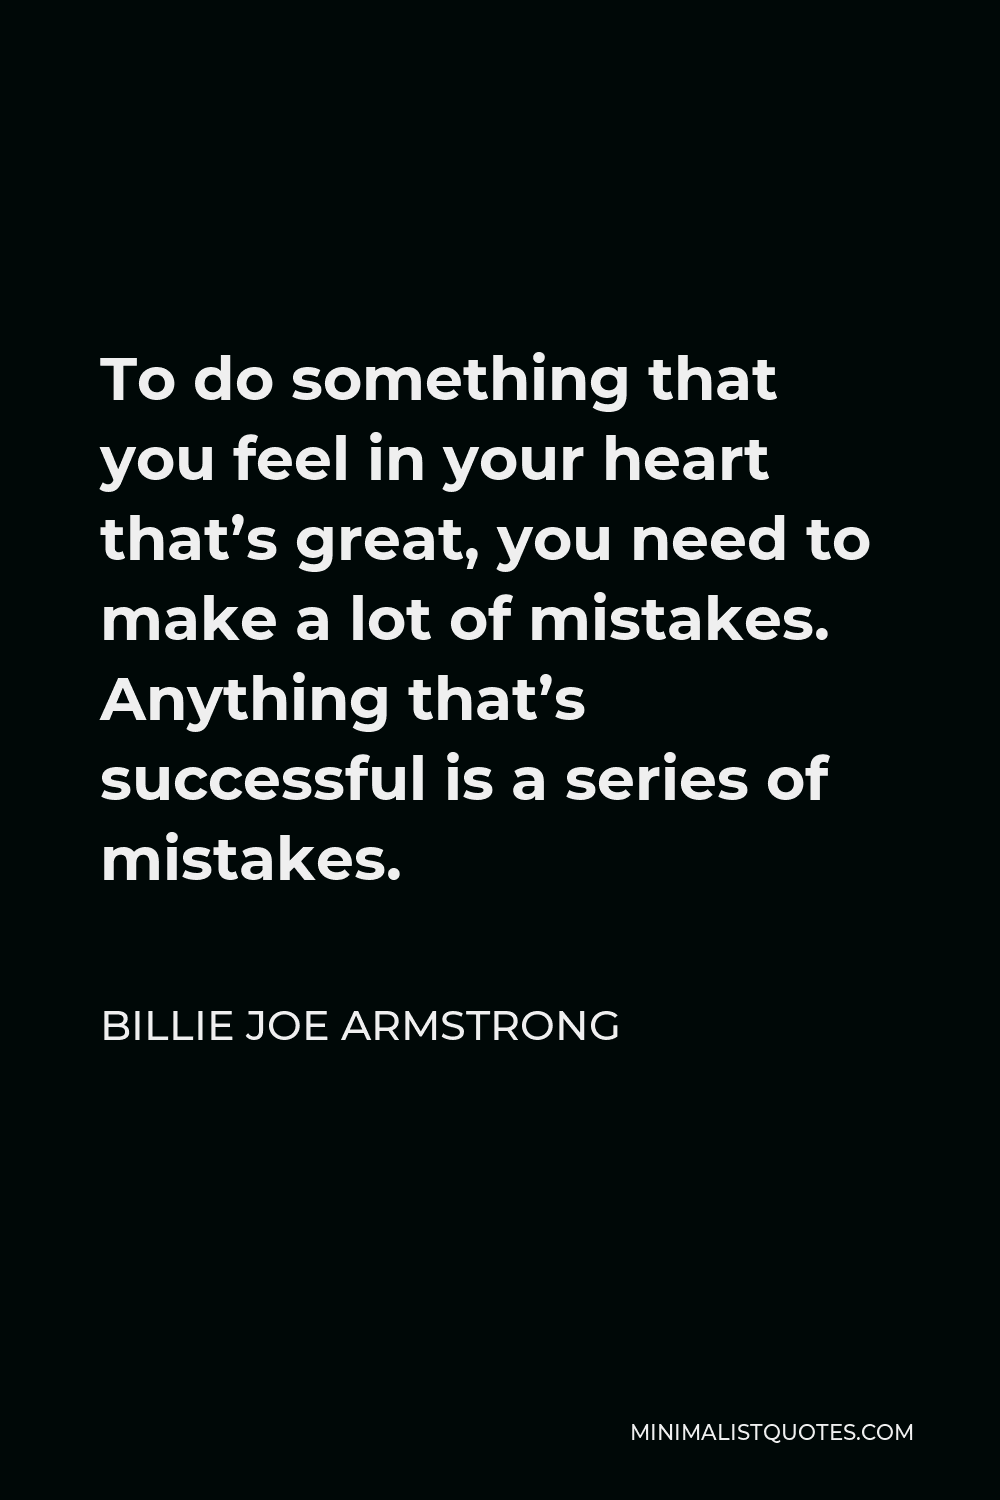 Billie Joe Armstrong Quote - To do something that you feel in your heart that’s great, you need to make a lot of mistakes. Anything that’s successful is a series of mistakes.